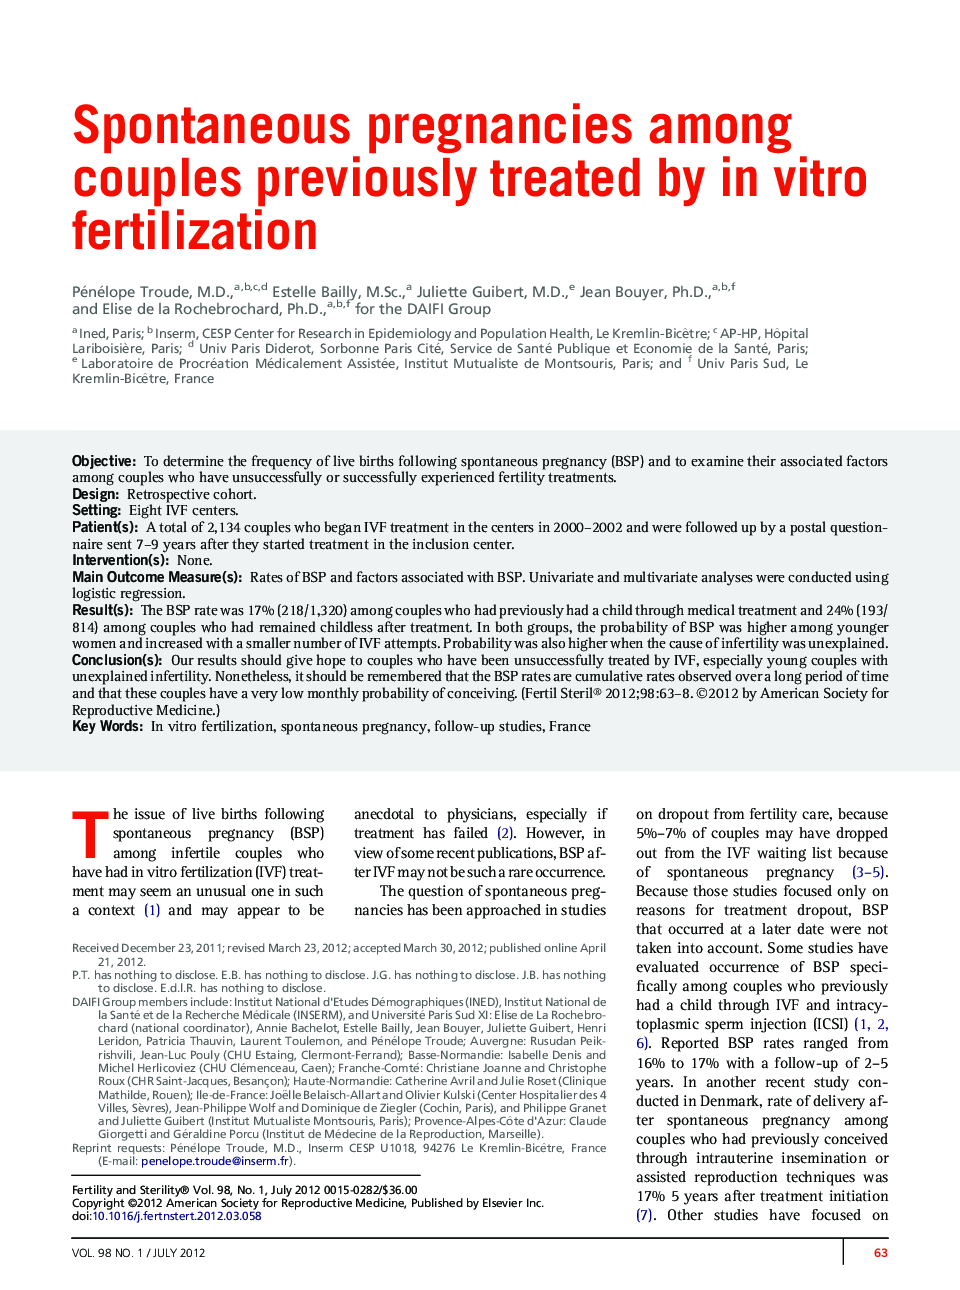 Spontaneous pregnancies among couples previously treated by in vitro fertilization 